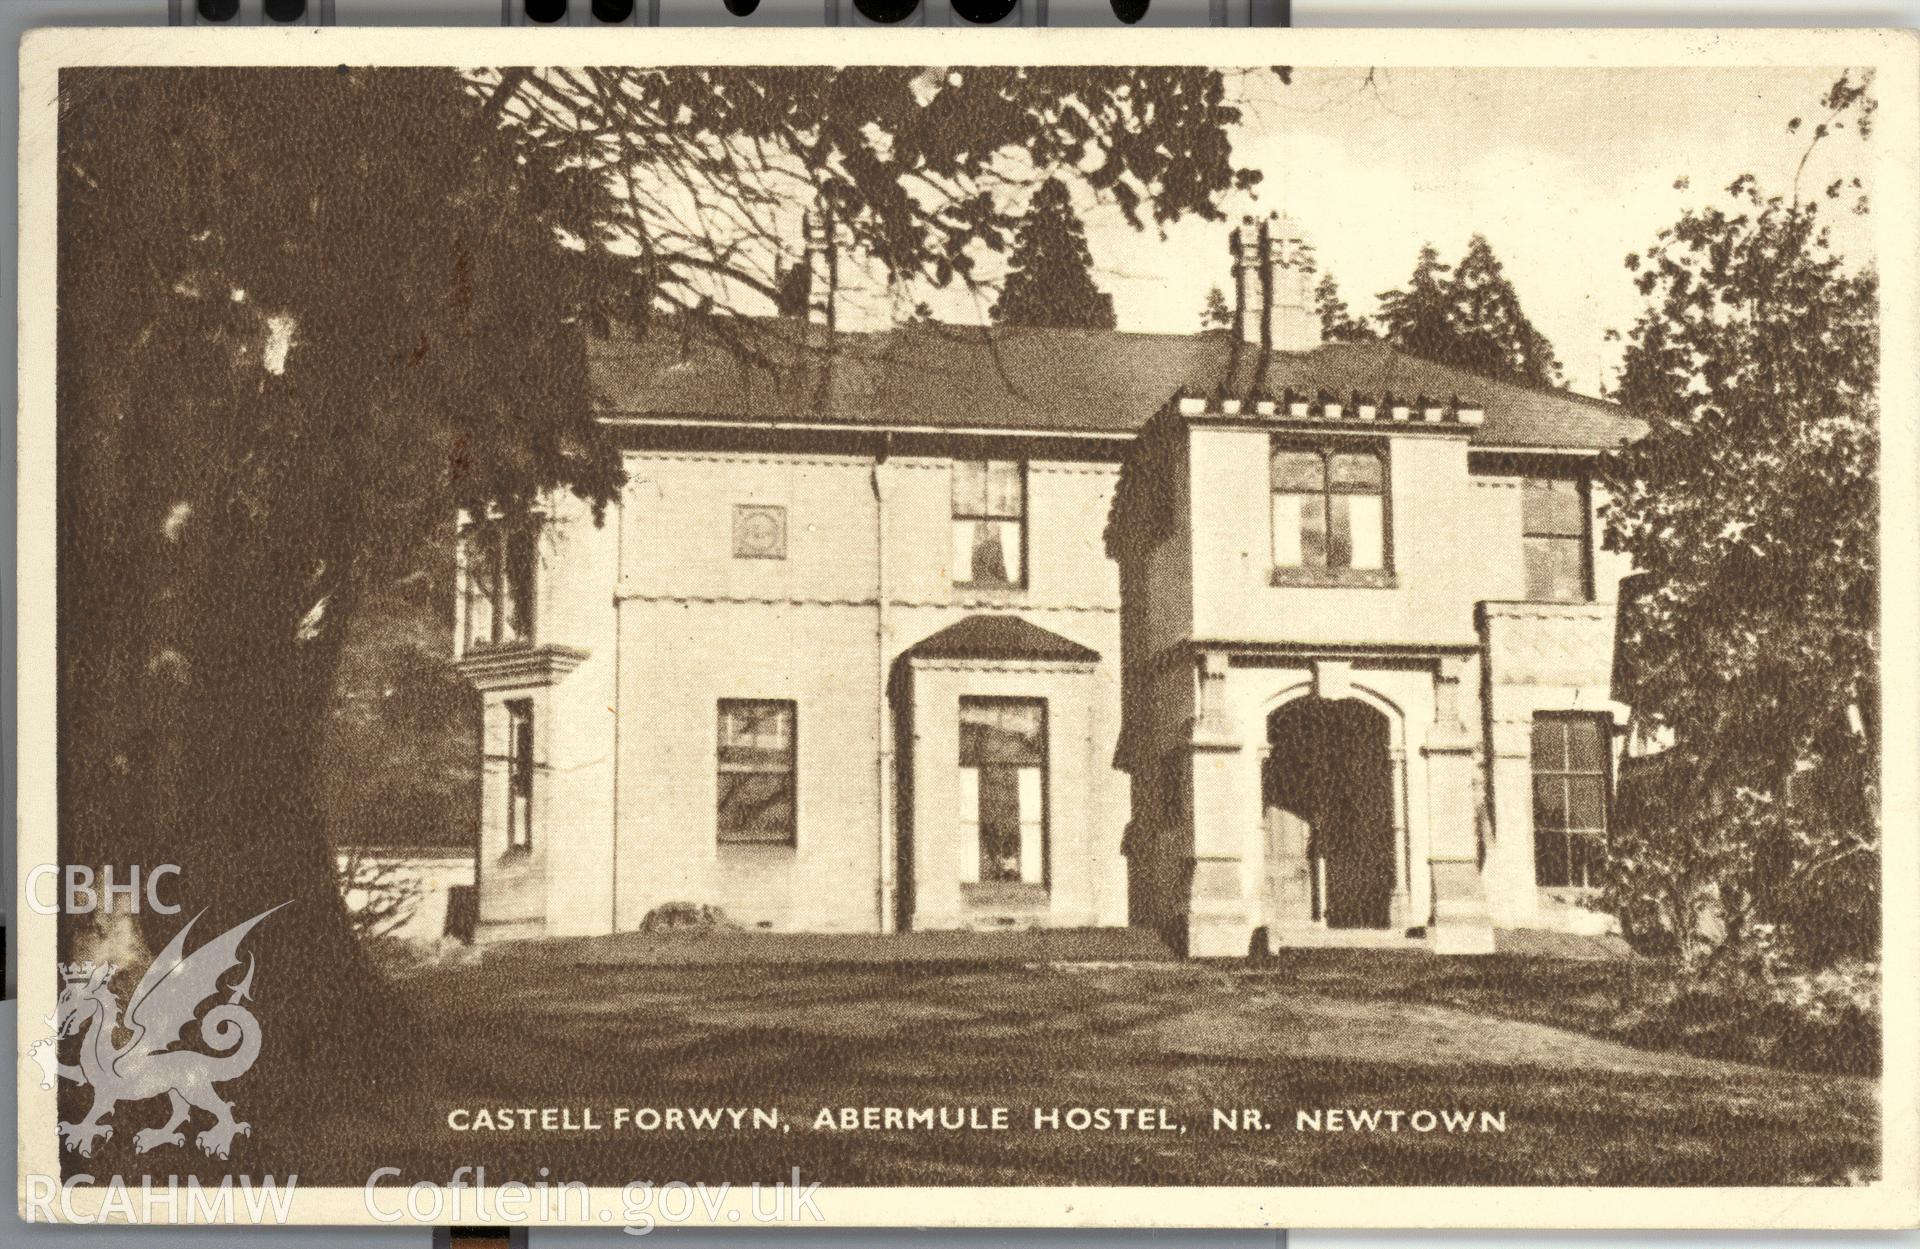 Digitised postcard image of Castell Forwyn, Llandyssil, Youth Hostels Association (Birmingham Reg. Group). Produced by Parks and Gardens Data Services, from an original item in the Peter Davis Collection at Parks and Gardens UK. We hold only web-resolution images of this collection, suitable for viewing on screen and for research purposes only. We do not hold the original images, or publication quality scans.